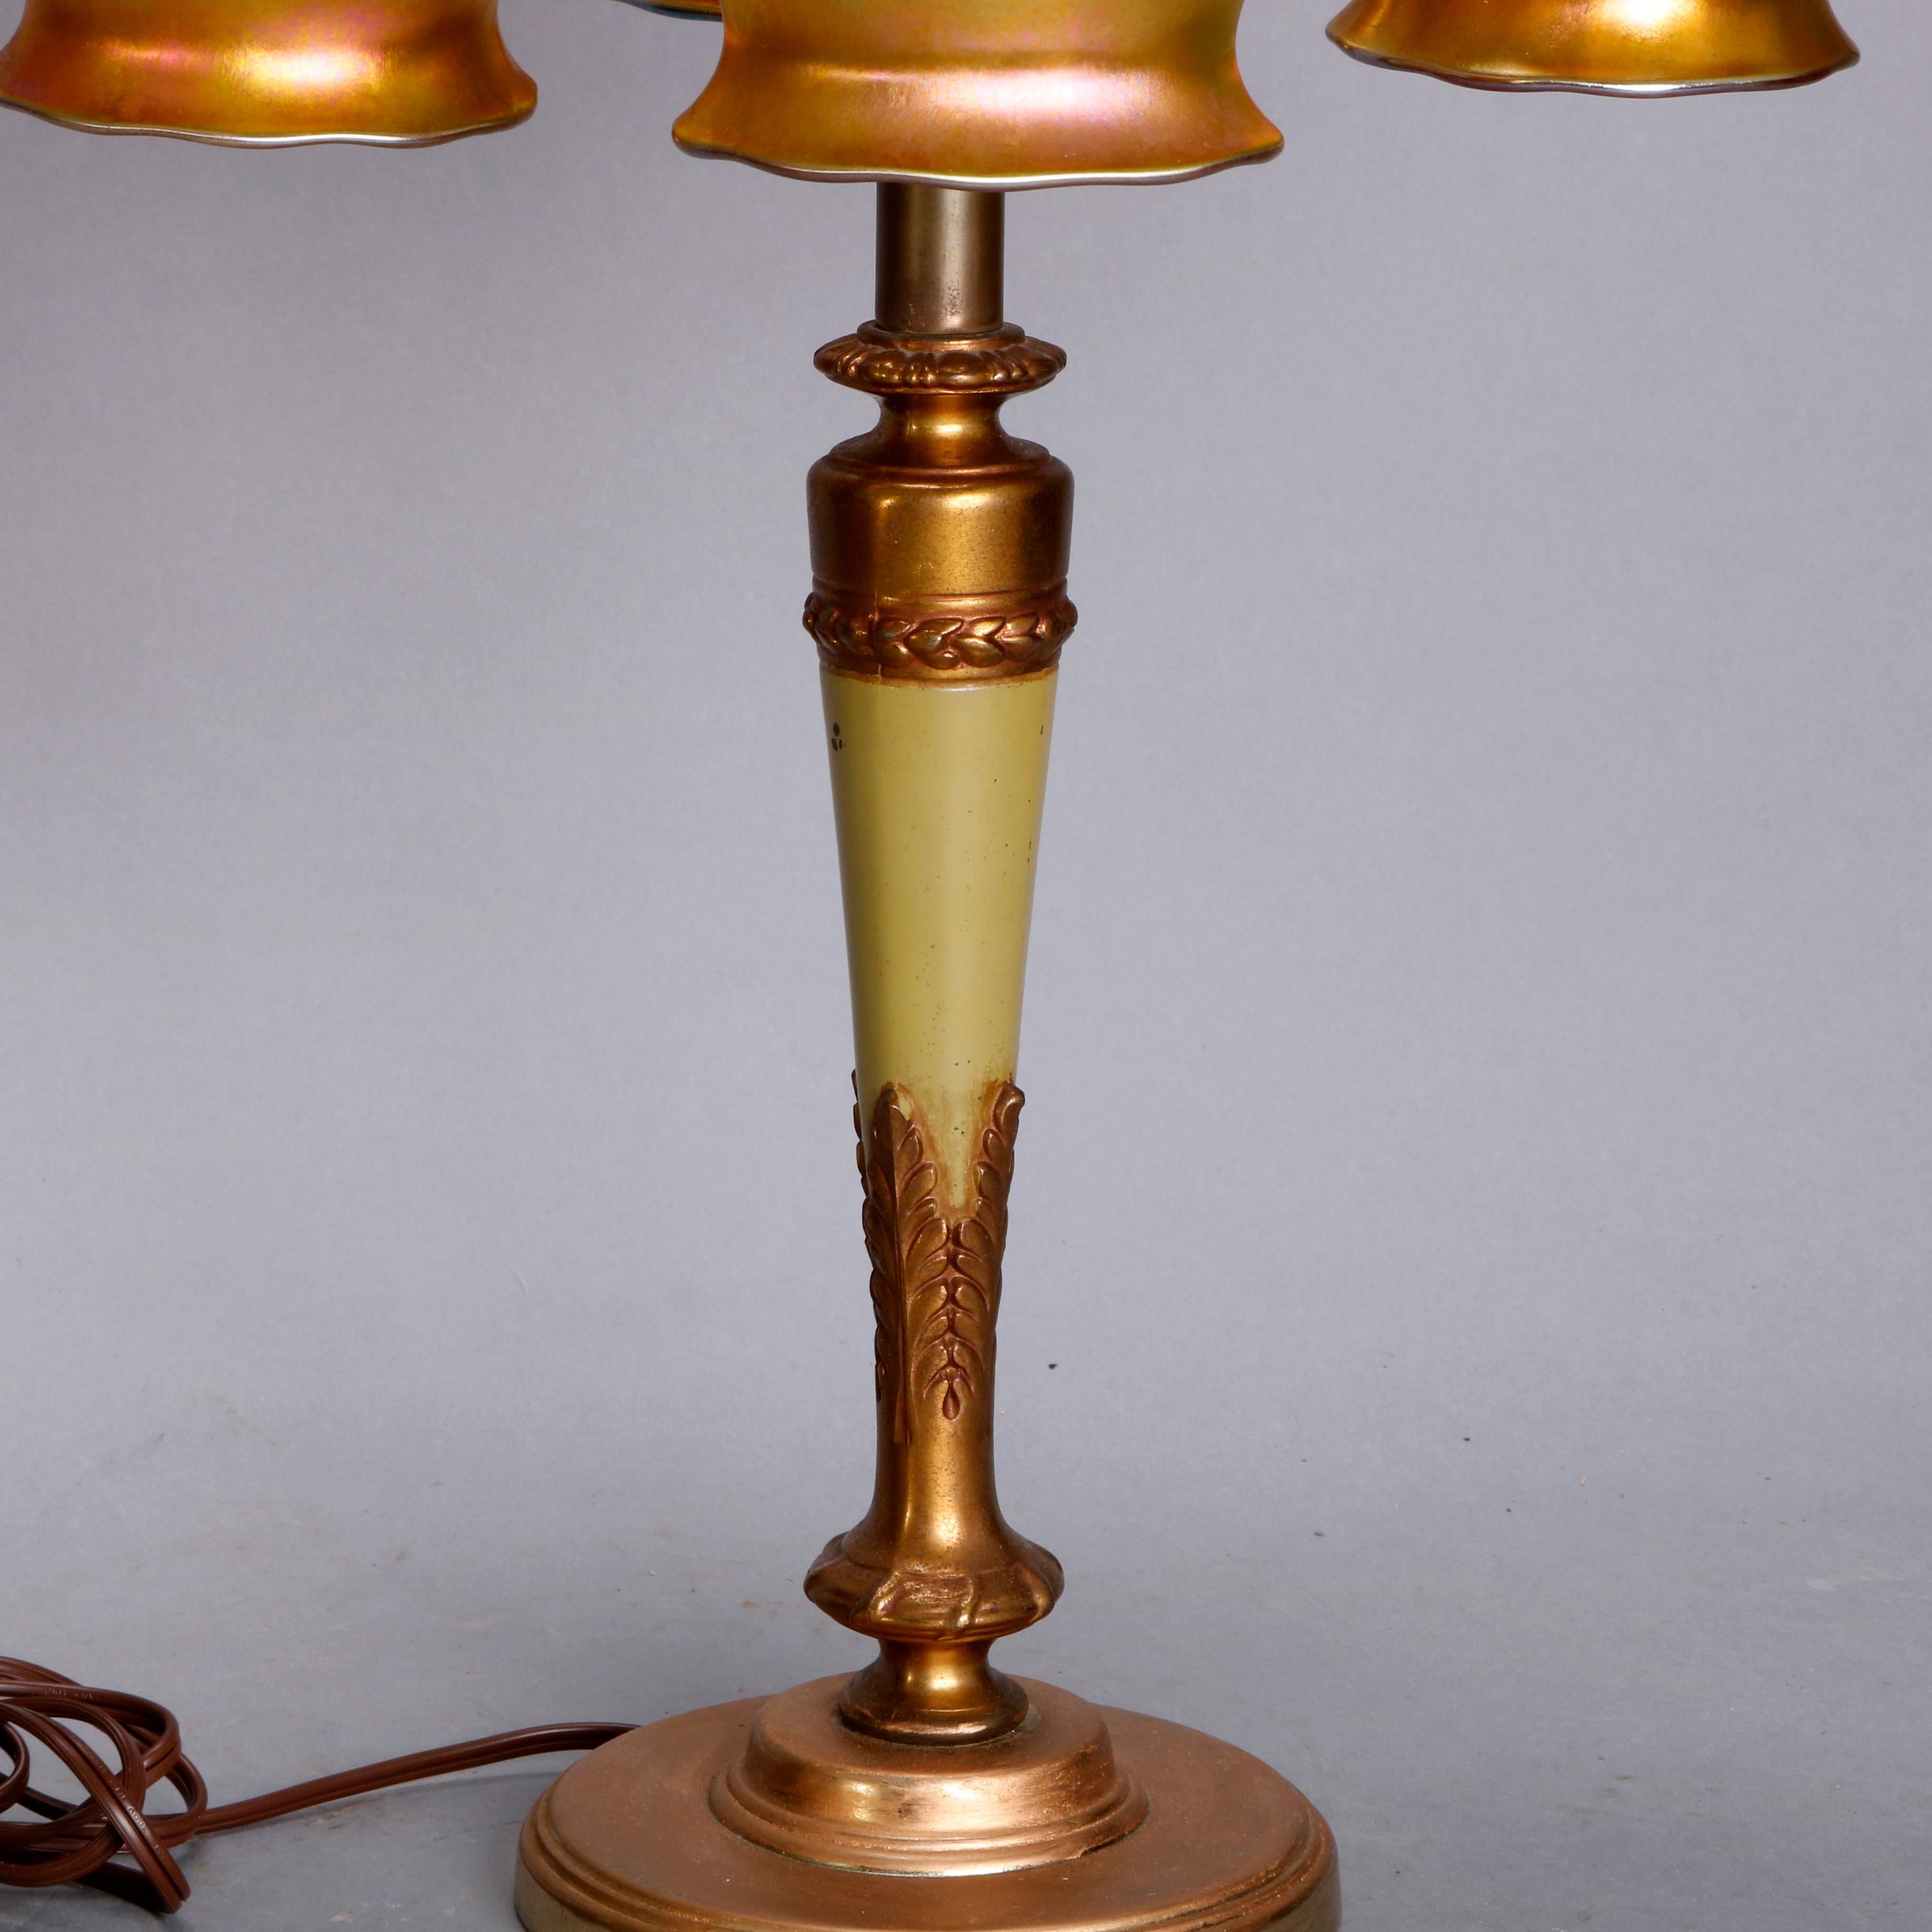 American Antique Arts & Crafts Table Lamp with Gold Aurene Steuben Art Glass Shades